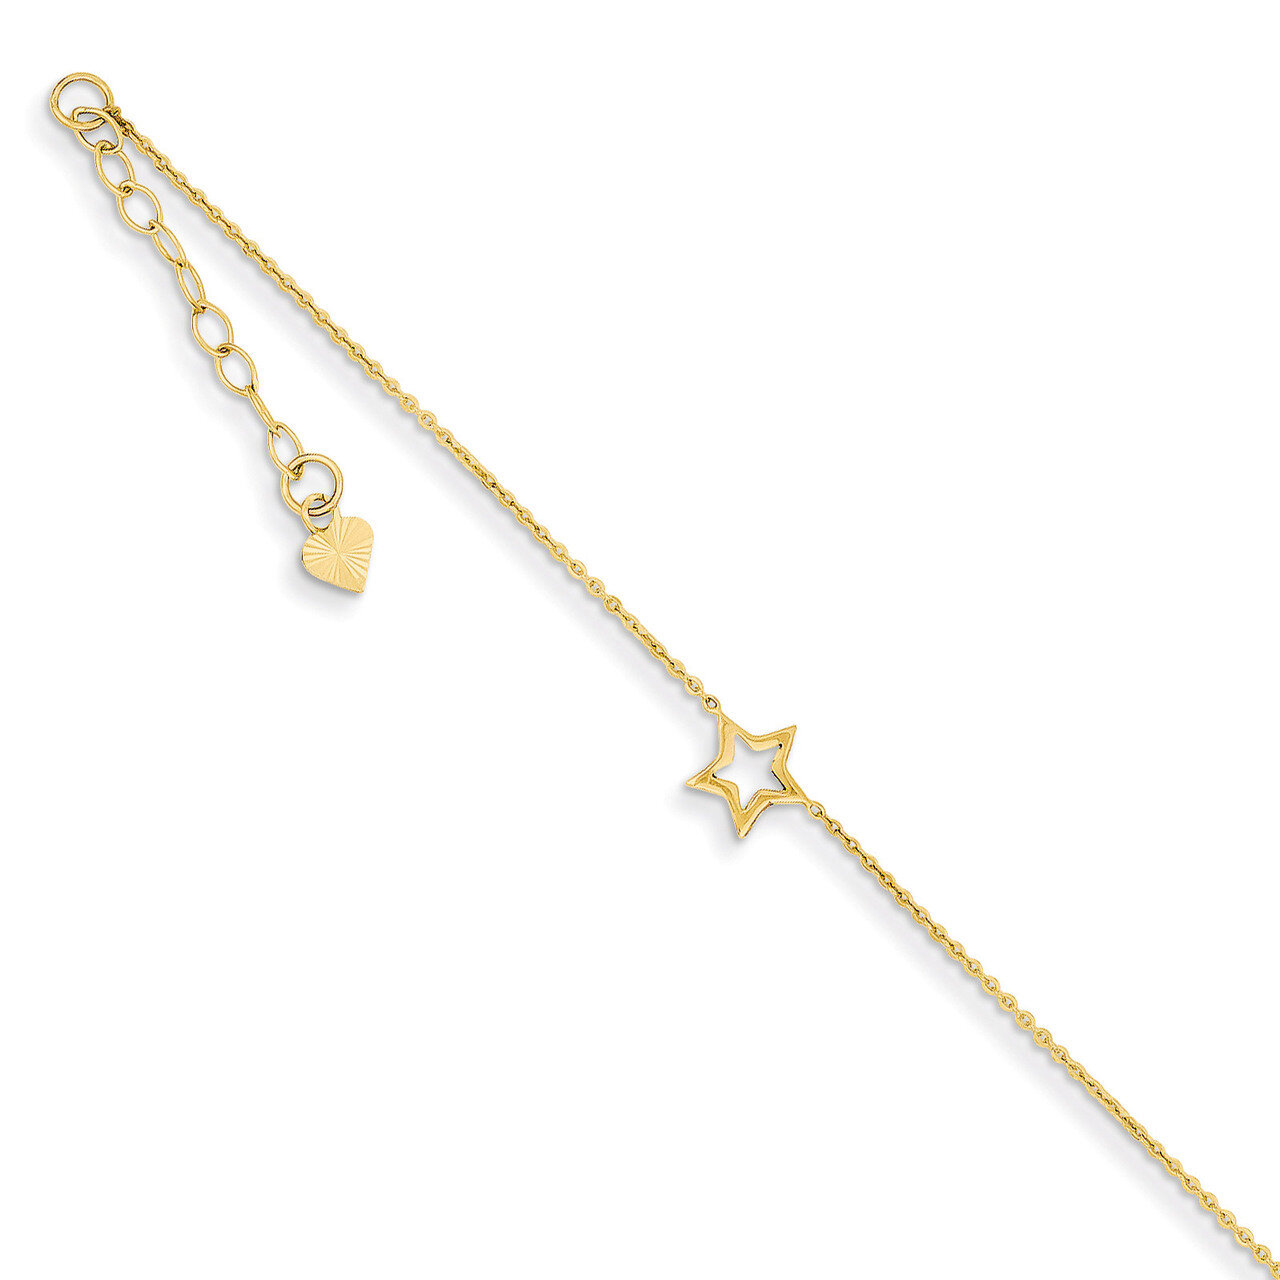 Adjustable Star Anklet with 1 extension 9 Inch 14k Gold ANK199-9